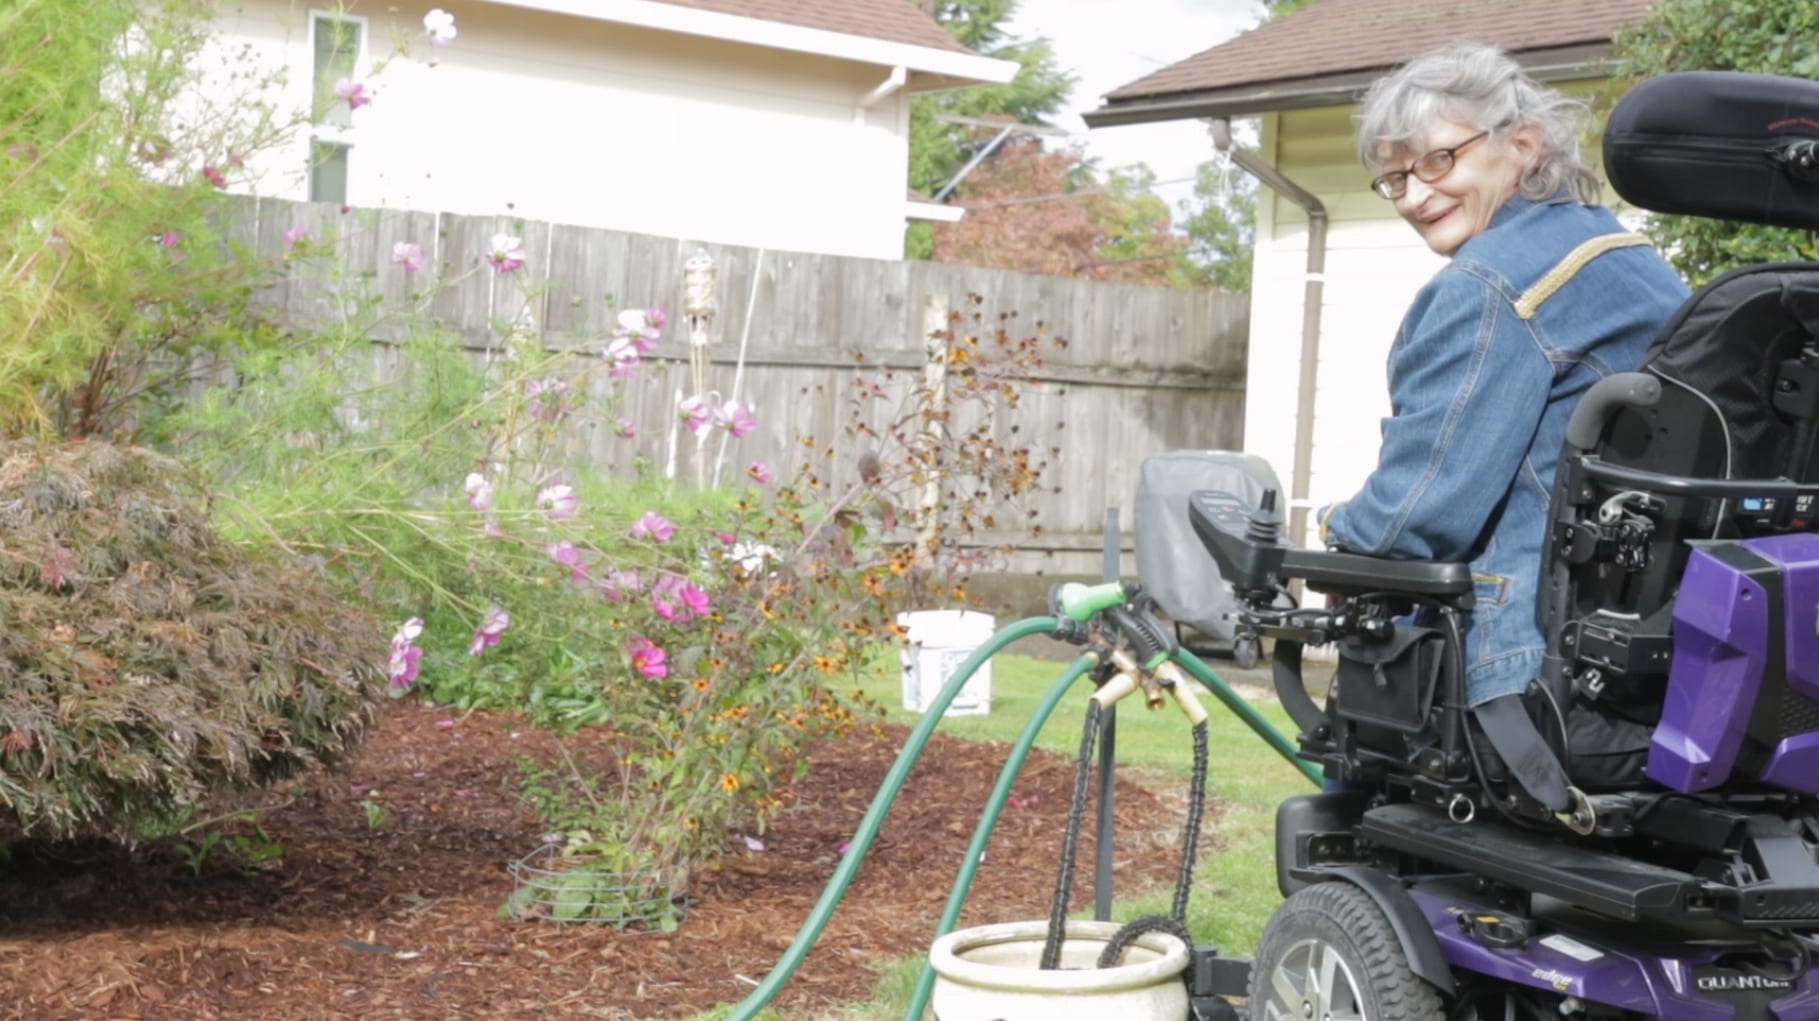 Image of woman using a wheelchair in her yard gardening